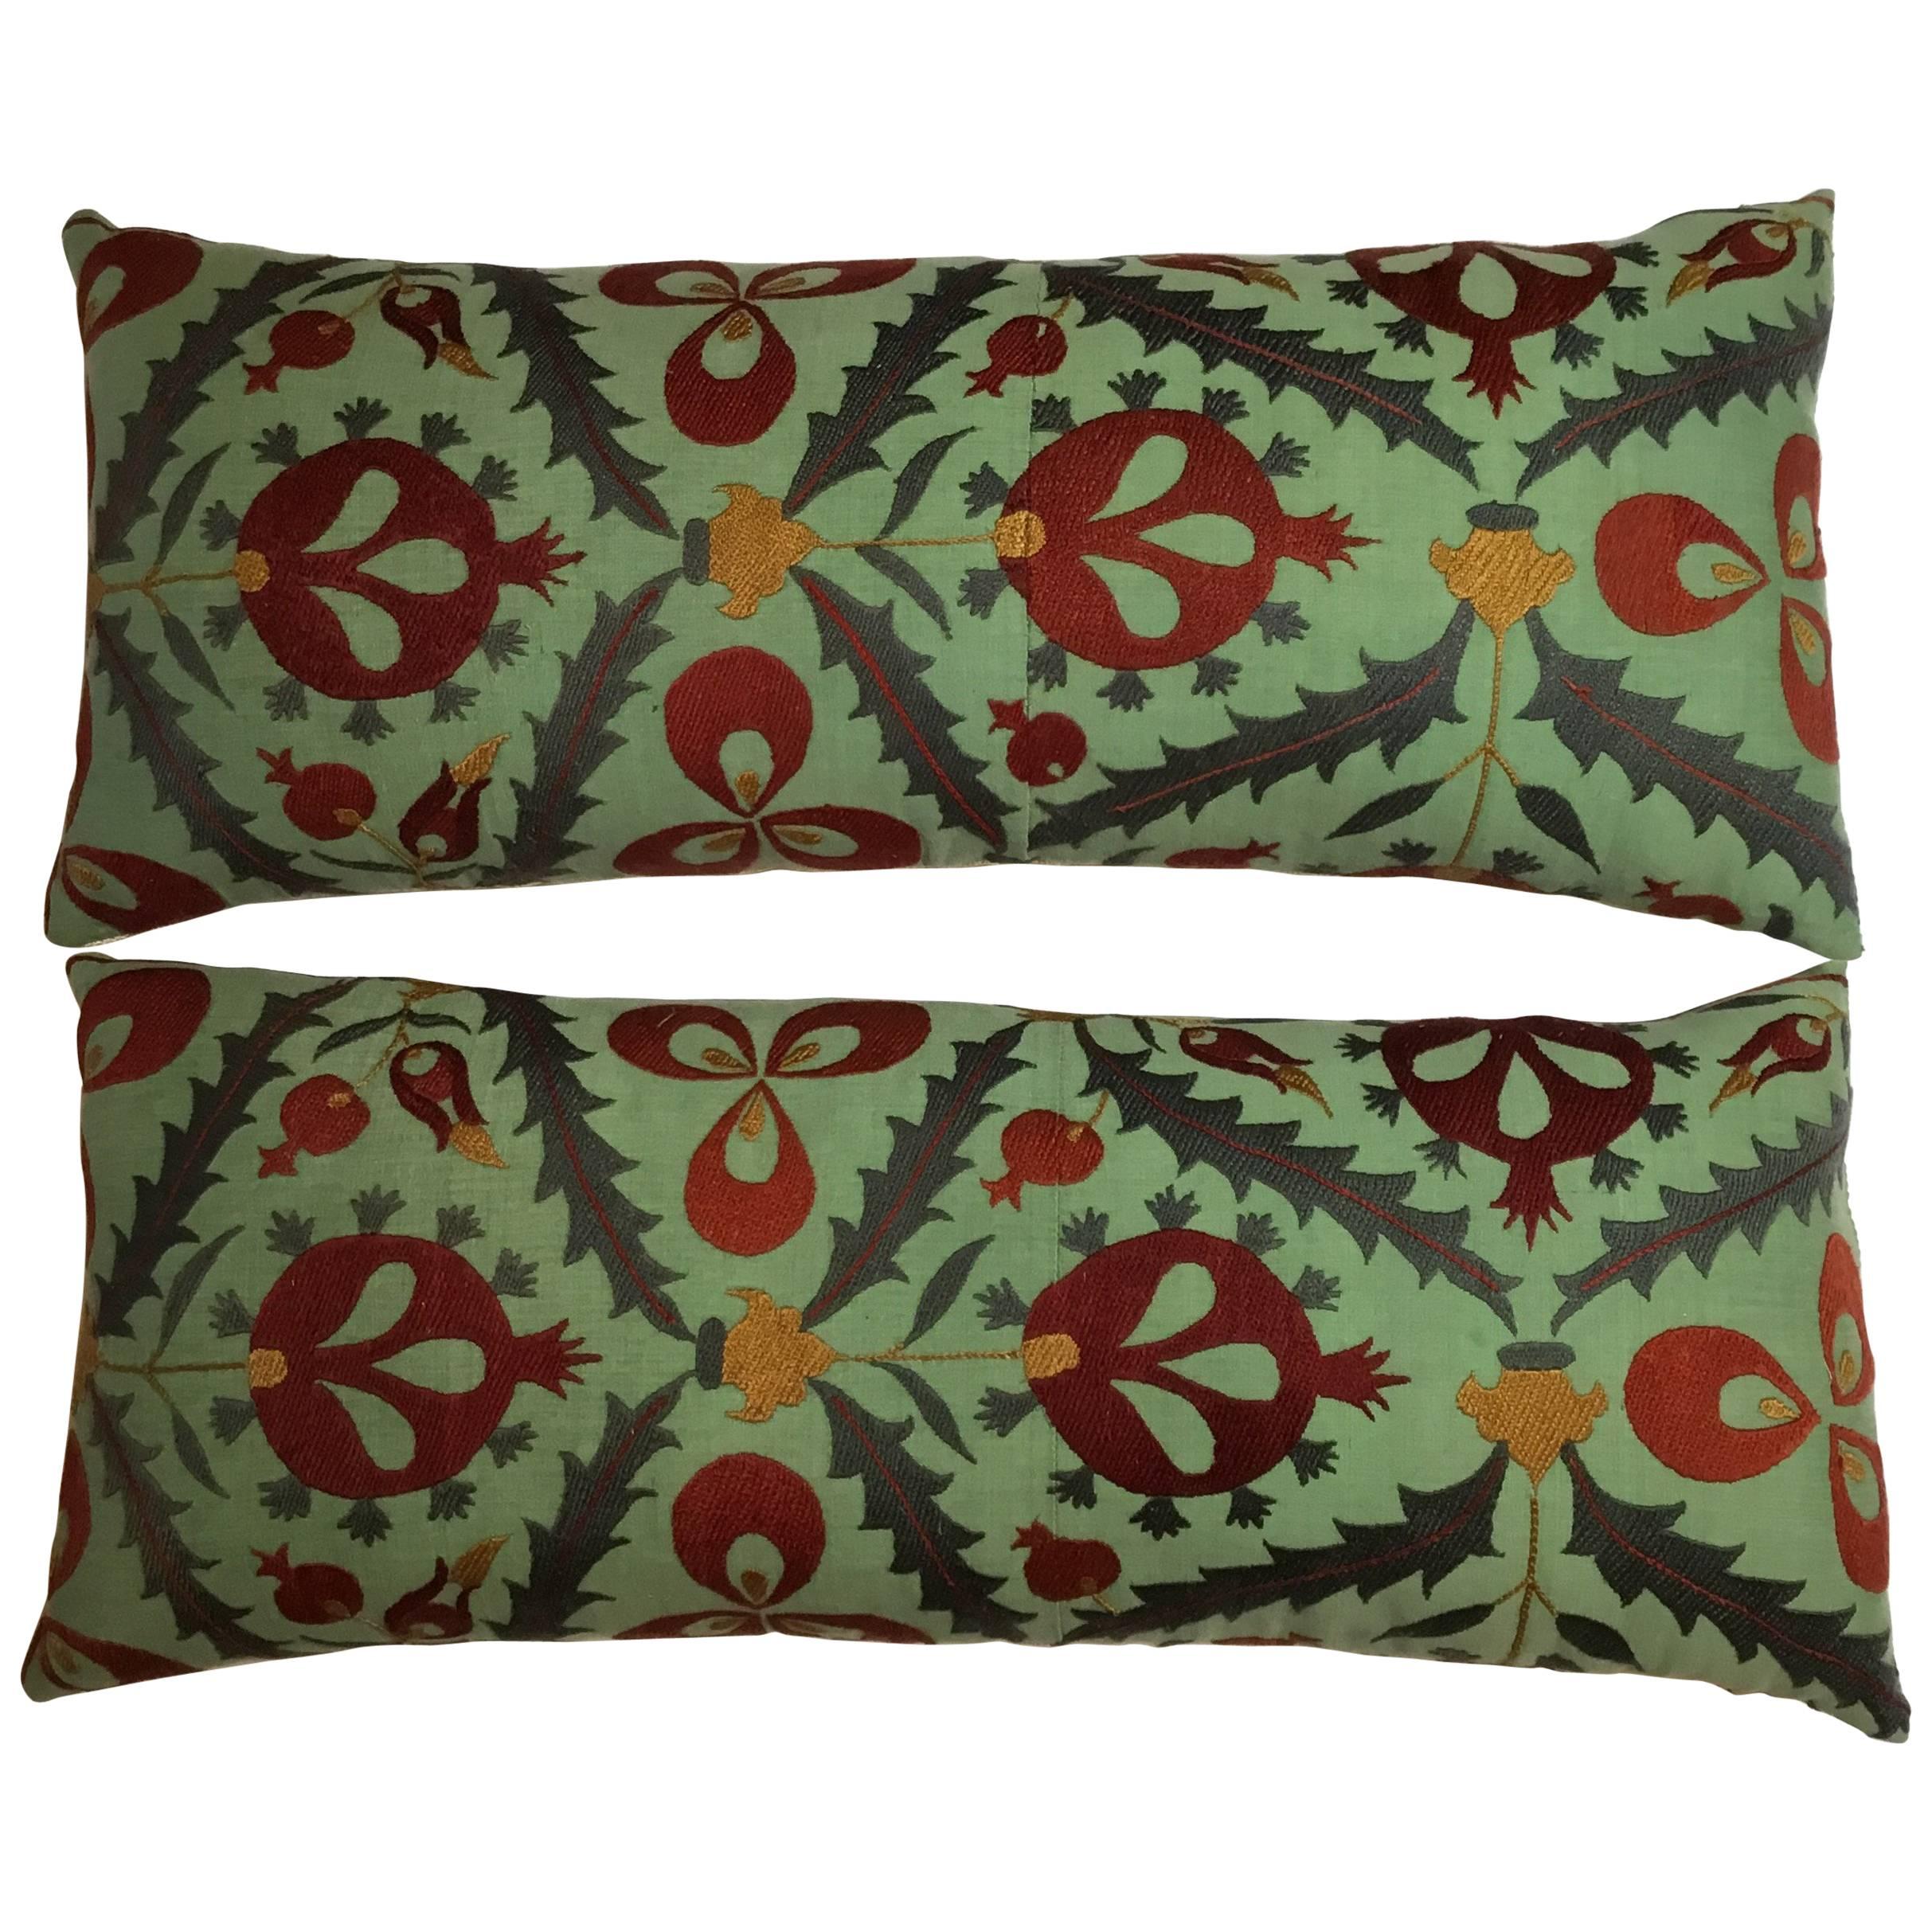 Pair of Hand Embroidery Suzani Pillows